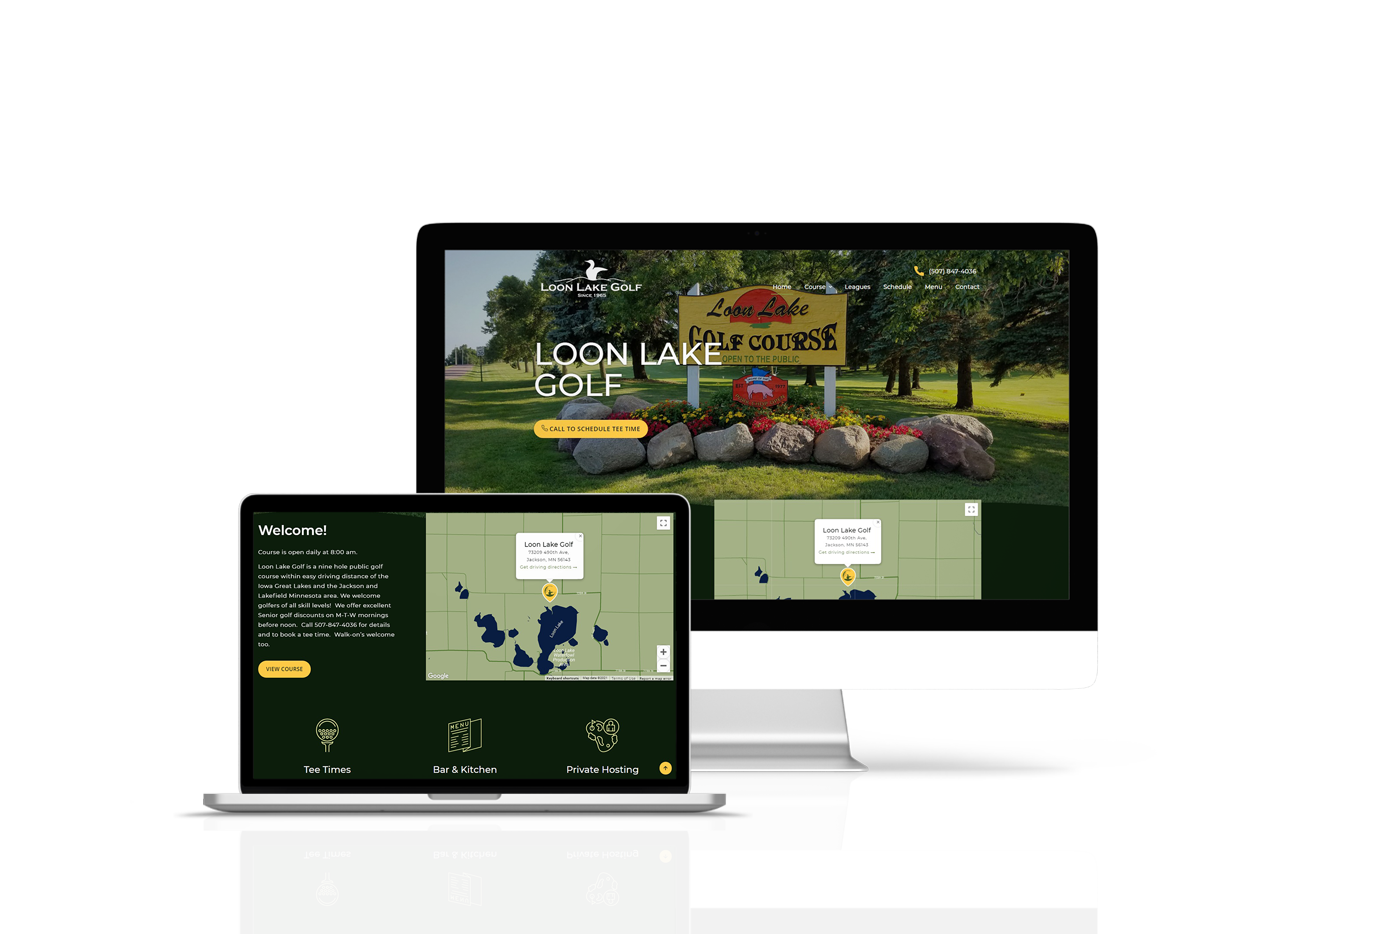 Mockups of the laptop and desktop views of the Loon Lake Golf website